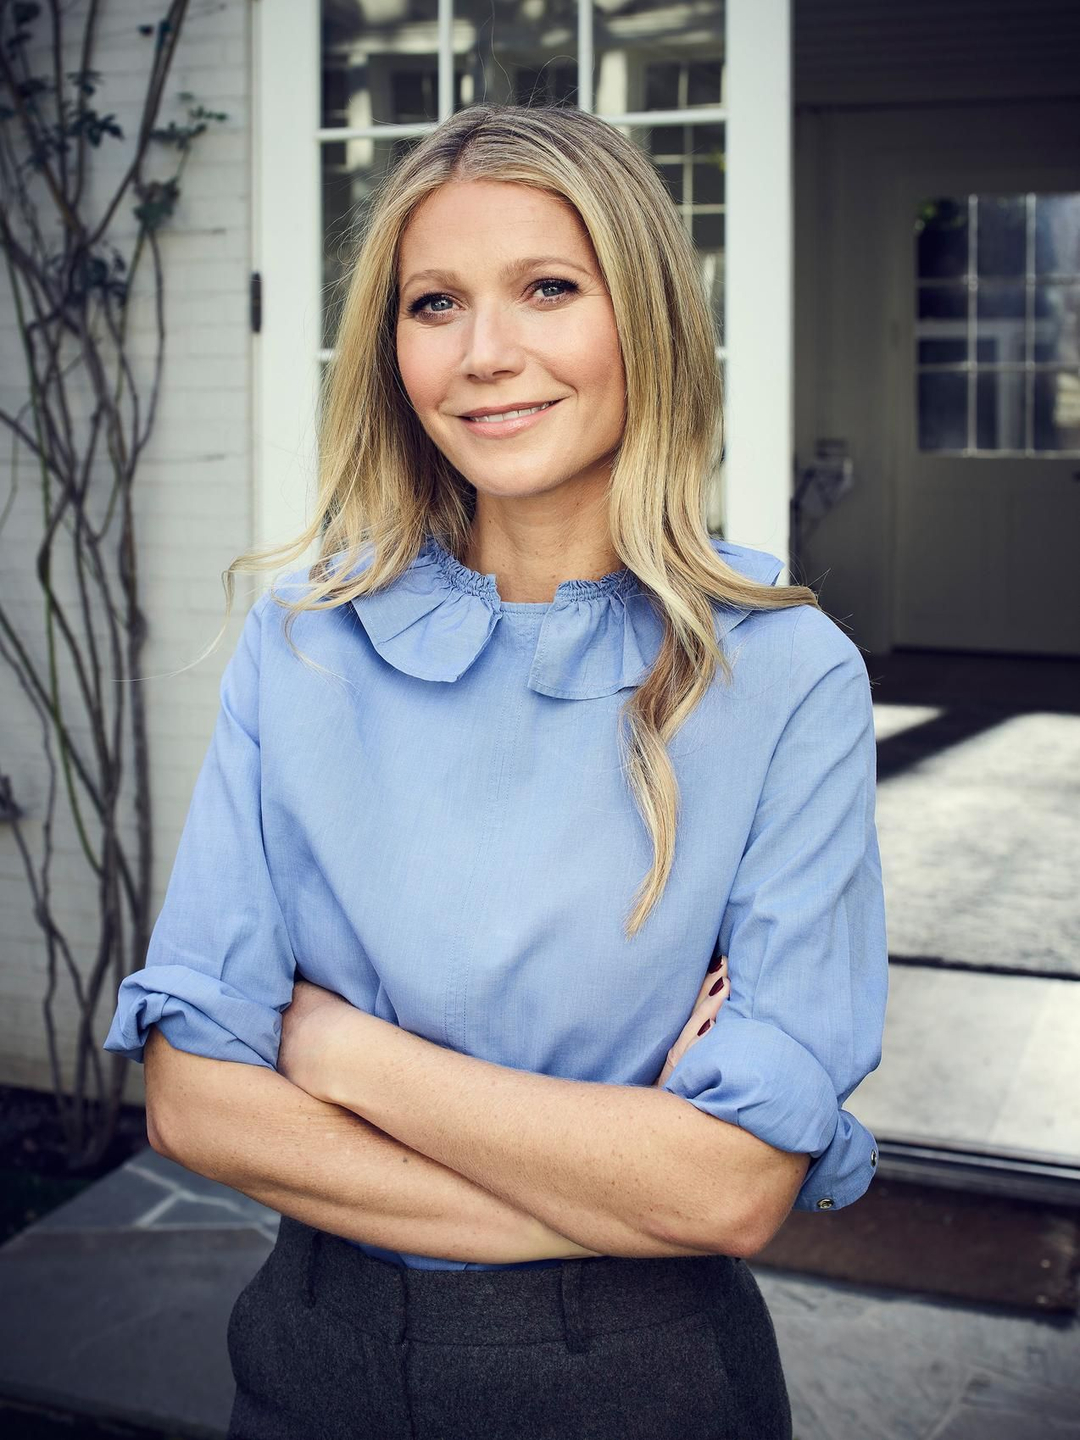 Gwyneth Paltrow unphotoshopped pictures